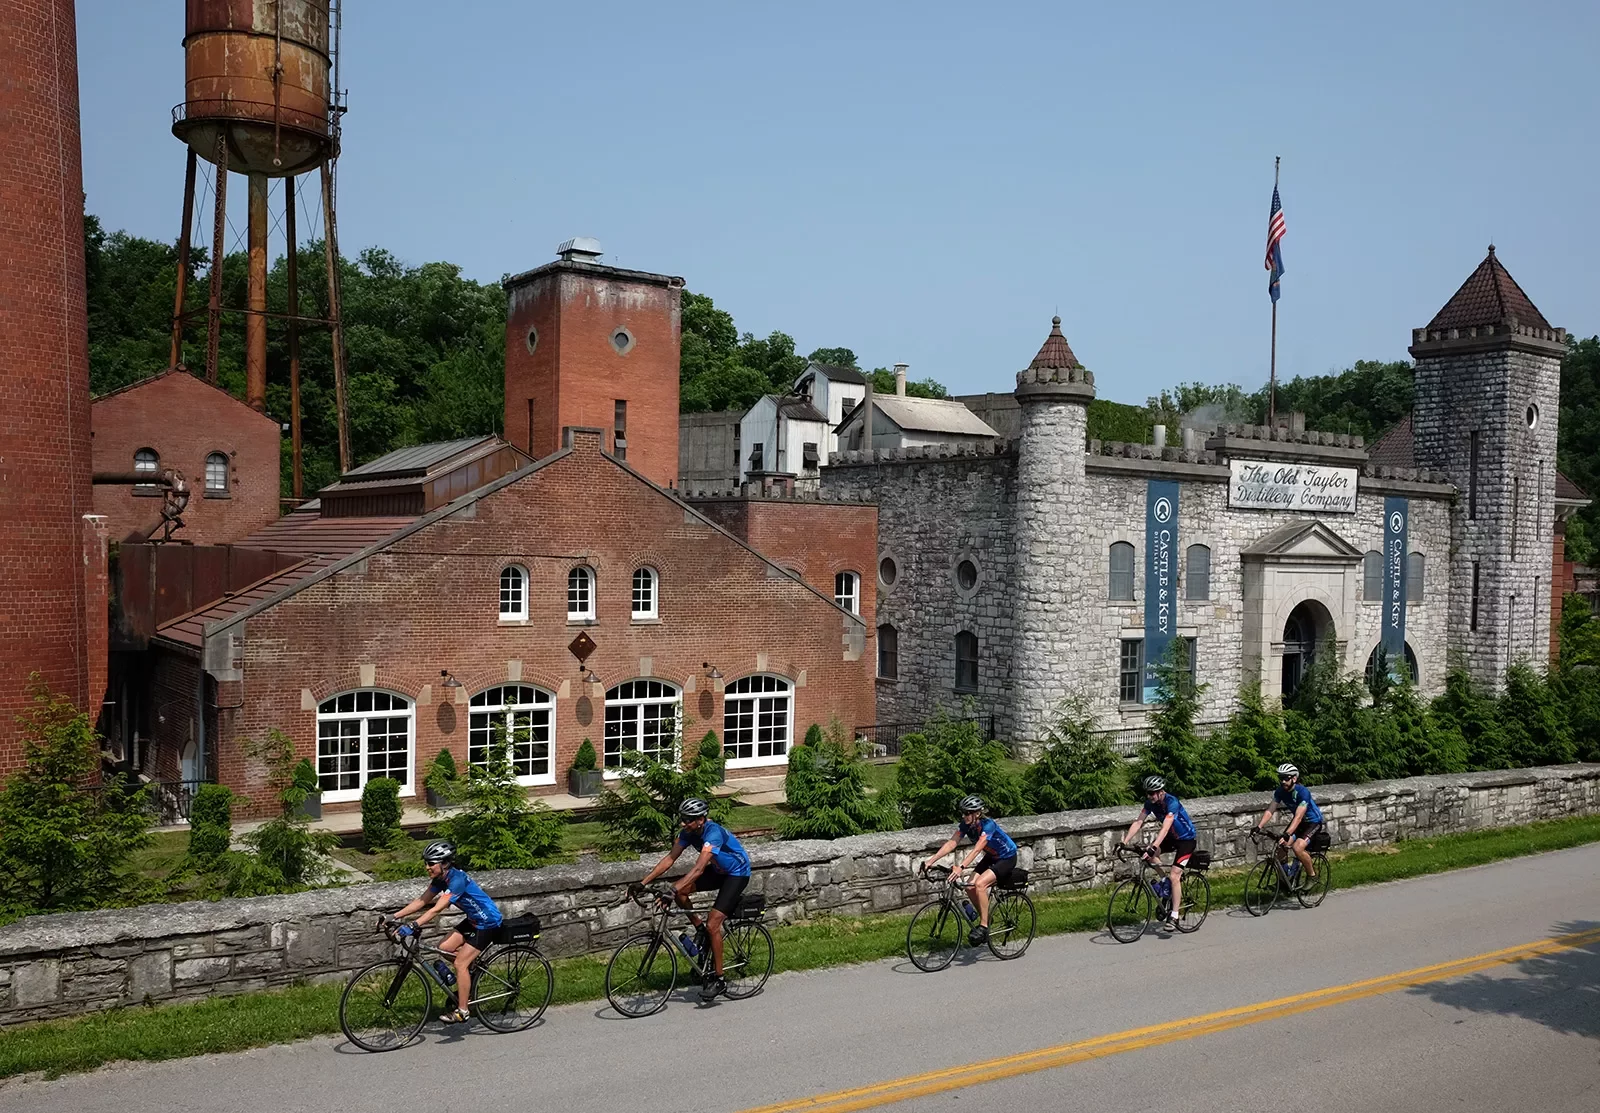 Five guests cycling past the &quot;OLD TAYLOR DISTILLERY COMPANY&quot; and it's brick buildings.